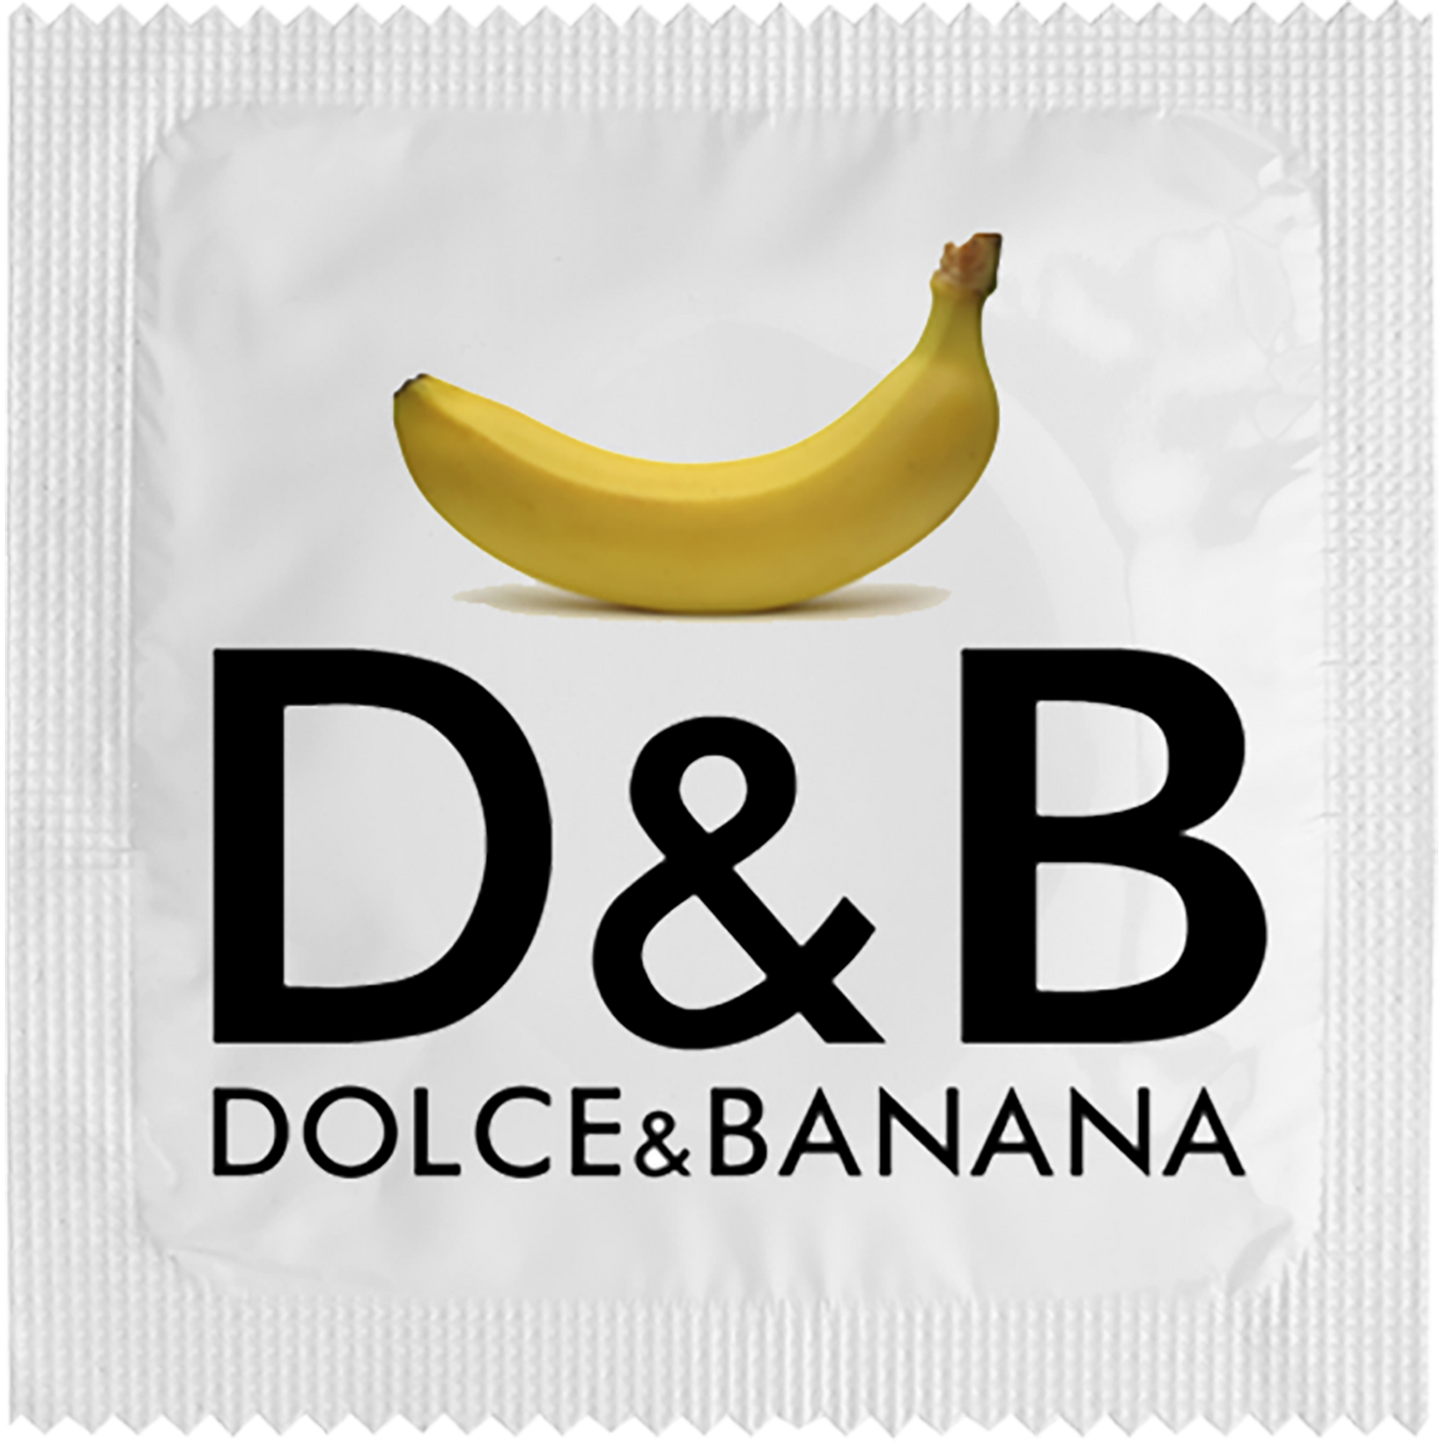 Image of funny condom "Dolce & Banana"